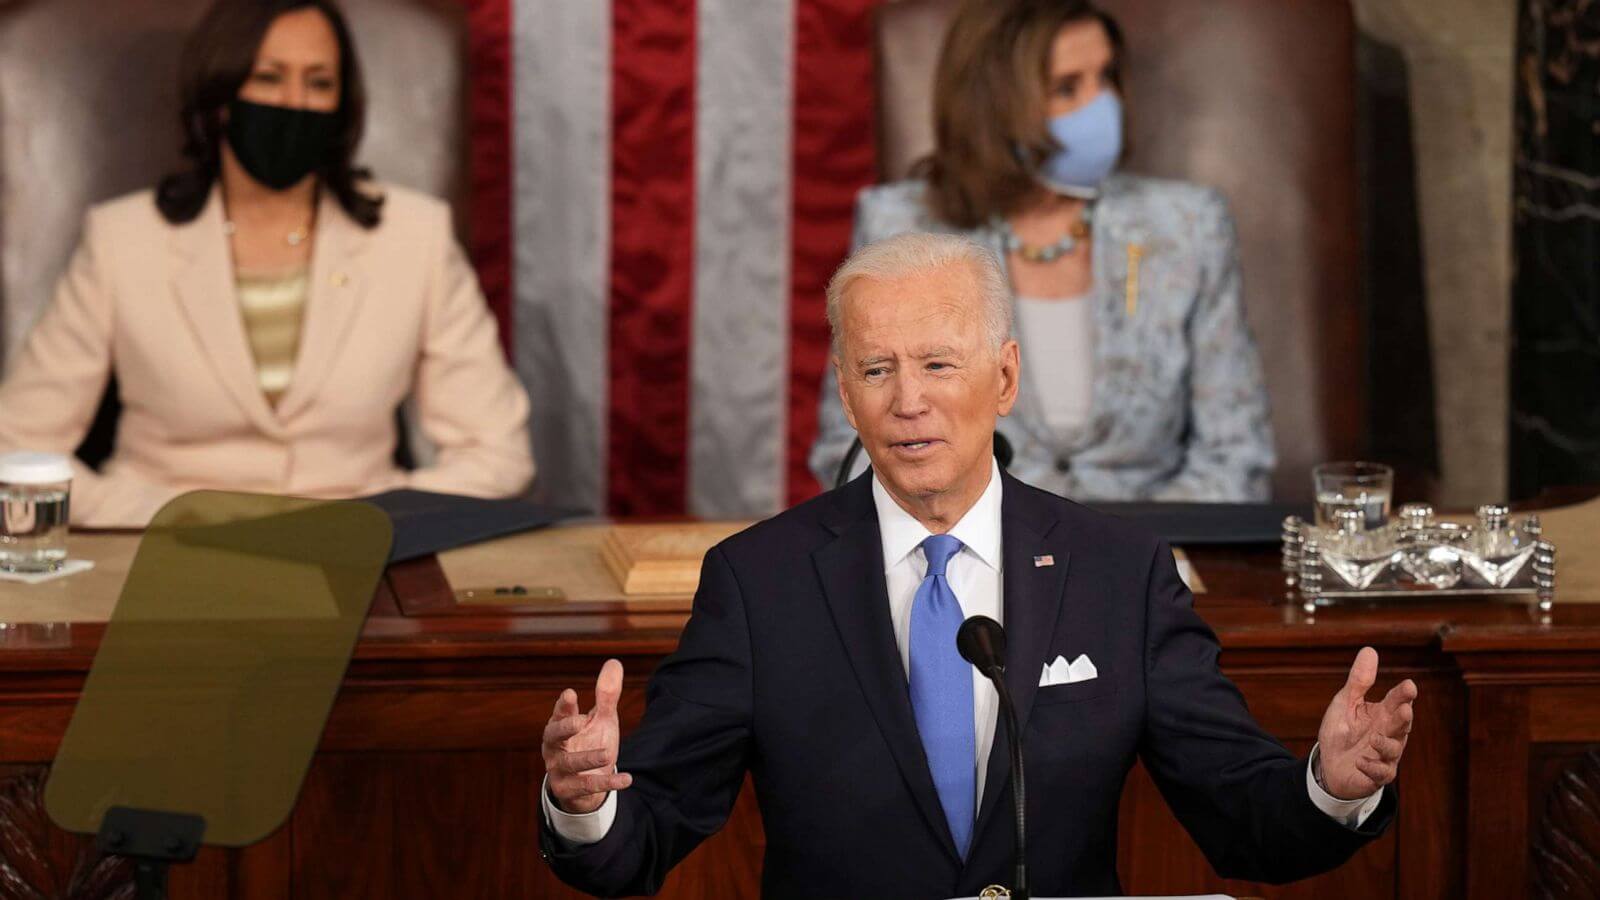 Biden Vows to ‘Sap’ Russia’s Economy, ‘Weaken’ its Military For “Unprovoked” Attack